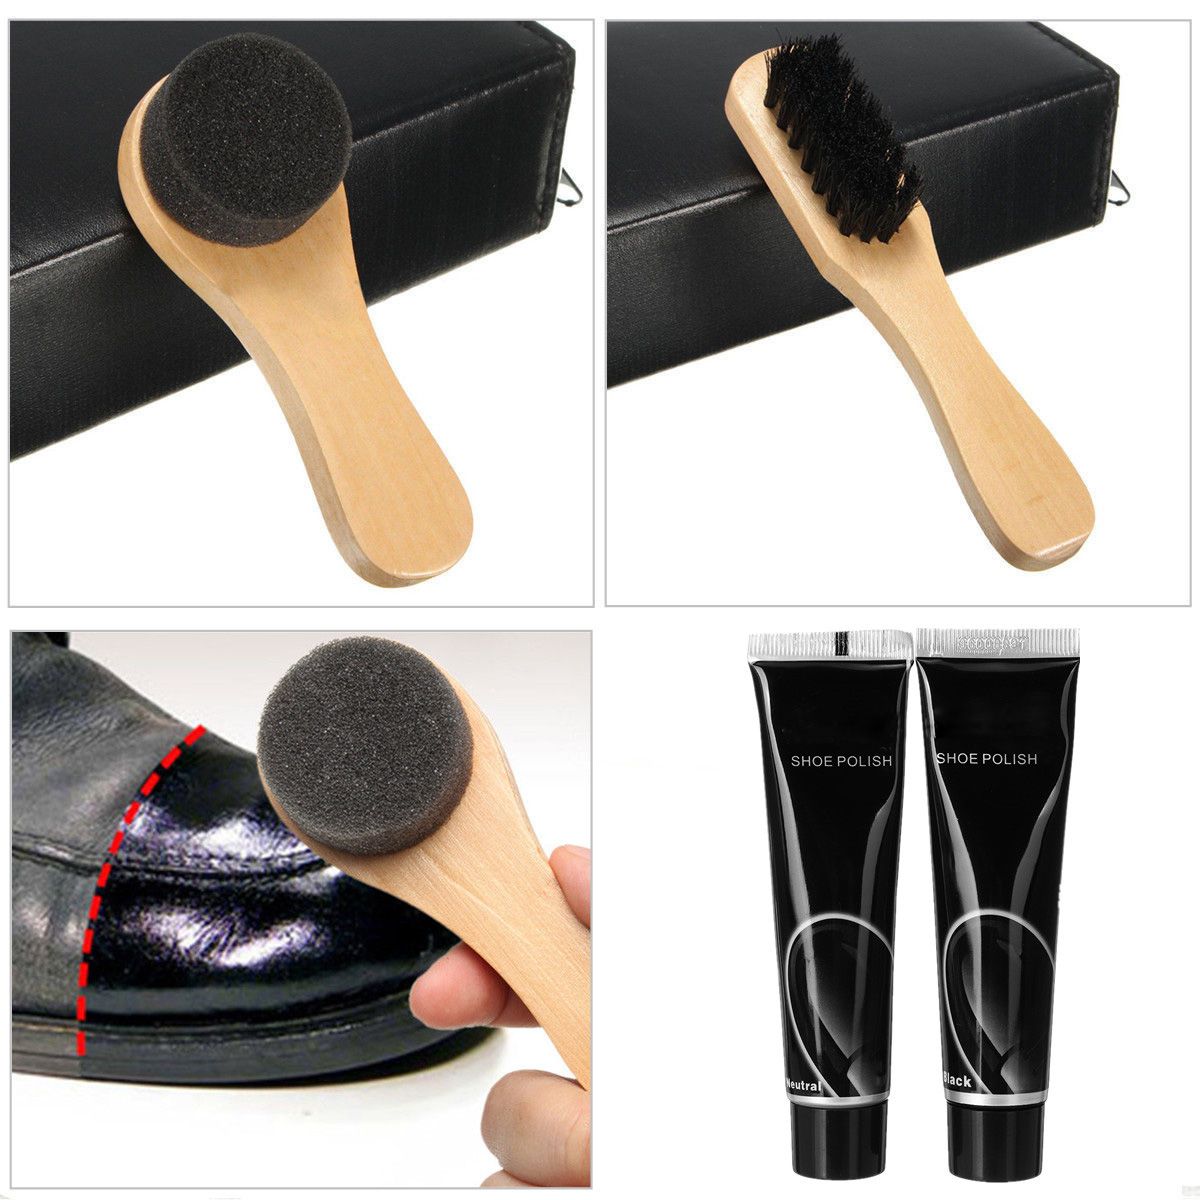 7-In-1-Shoes-Polish-Tools-Kit-Boot-Care-Leather-Craft-Shine-Cleaning-Brushes-Set-Tool-1376575